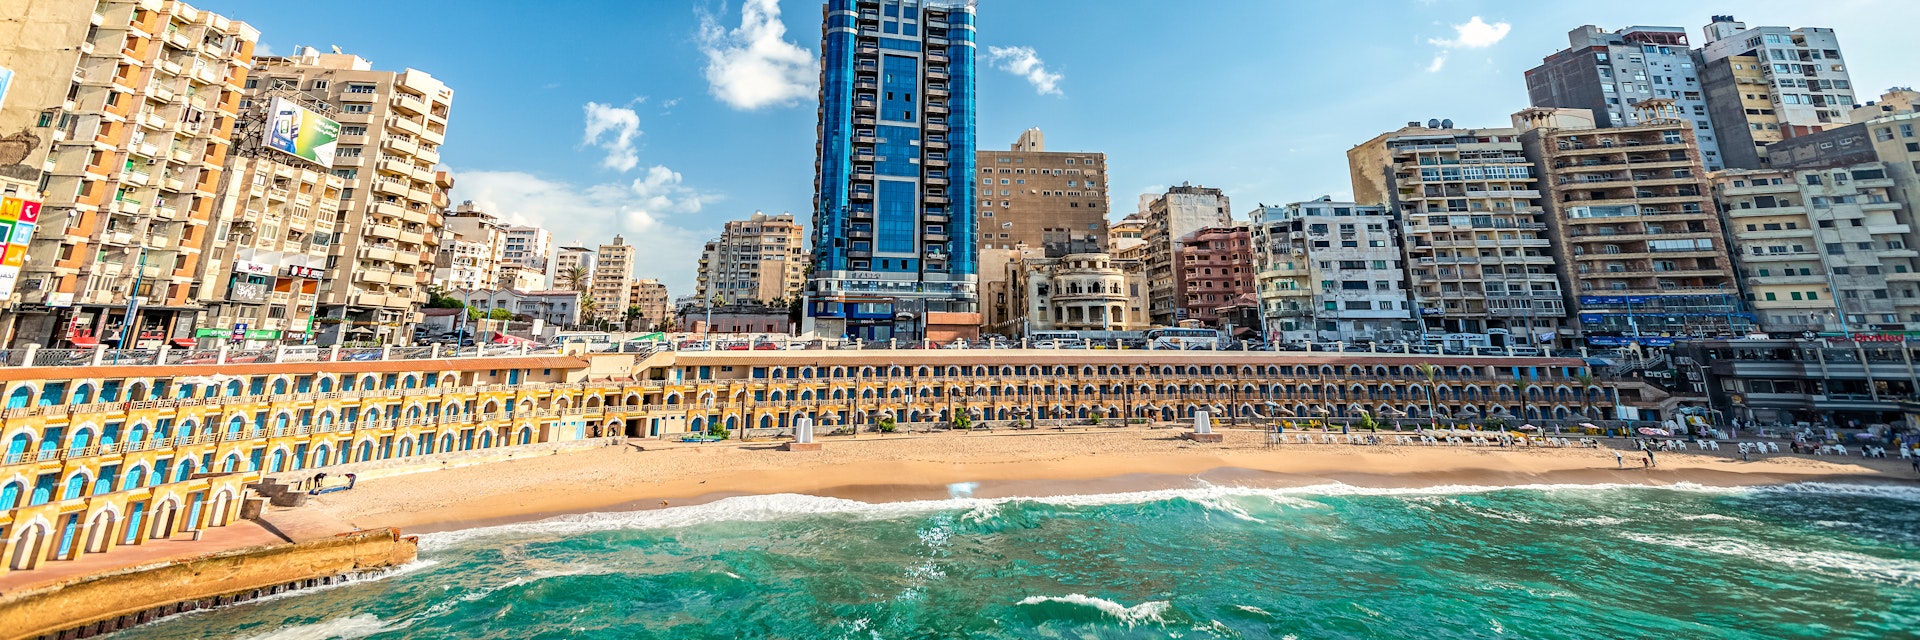 17/11/2018 Alexandria, Egypt, view on the Gulf from Stenley Bridge on a magnificent coastline with hotels and restaurants on a sunny day; Shutterstock ID 1383514676; full: digital; gl: 65050; netsuite: hub; your: Barbara Di Castro
1383514676